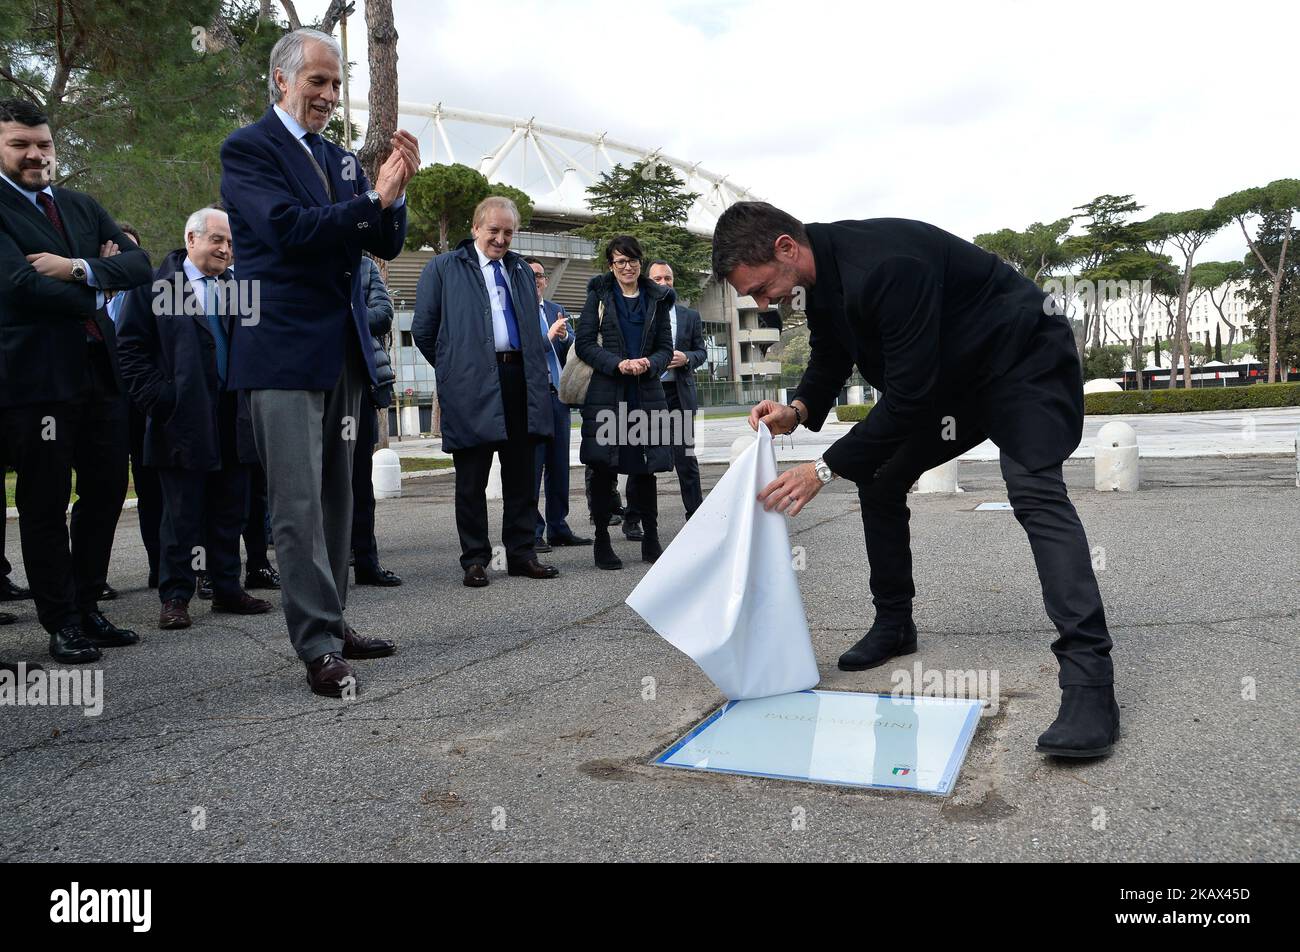 The president of the Italian Olympic Committee (CONI), Giovanni Malago (L) and former player Paolo Maldini (R) during the ceremony Walk of Fame in Rome, Italy, on 12 March 2018. The Walk of Fame is enriched with 5 more samples. Along the Via Olimpiadi, which leads straight to the Olympic stadium in Rome, new plates have been added dedicated to five blue champions no longer in business: the historic Milan captain and national defender, soccer player Paolo Maldini, the swimmer Massimiliano Rosolino, the middle distance runner Luigi Beccali, the cyclist Ercole Baldini and the volleyball player Sa Stock Photo